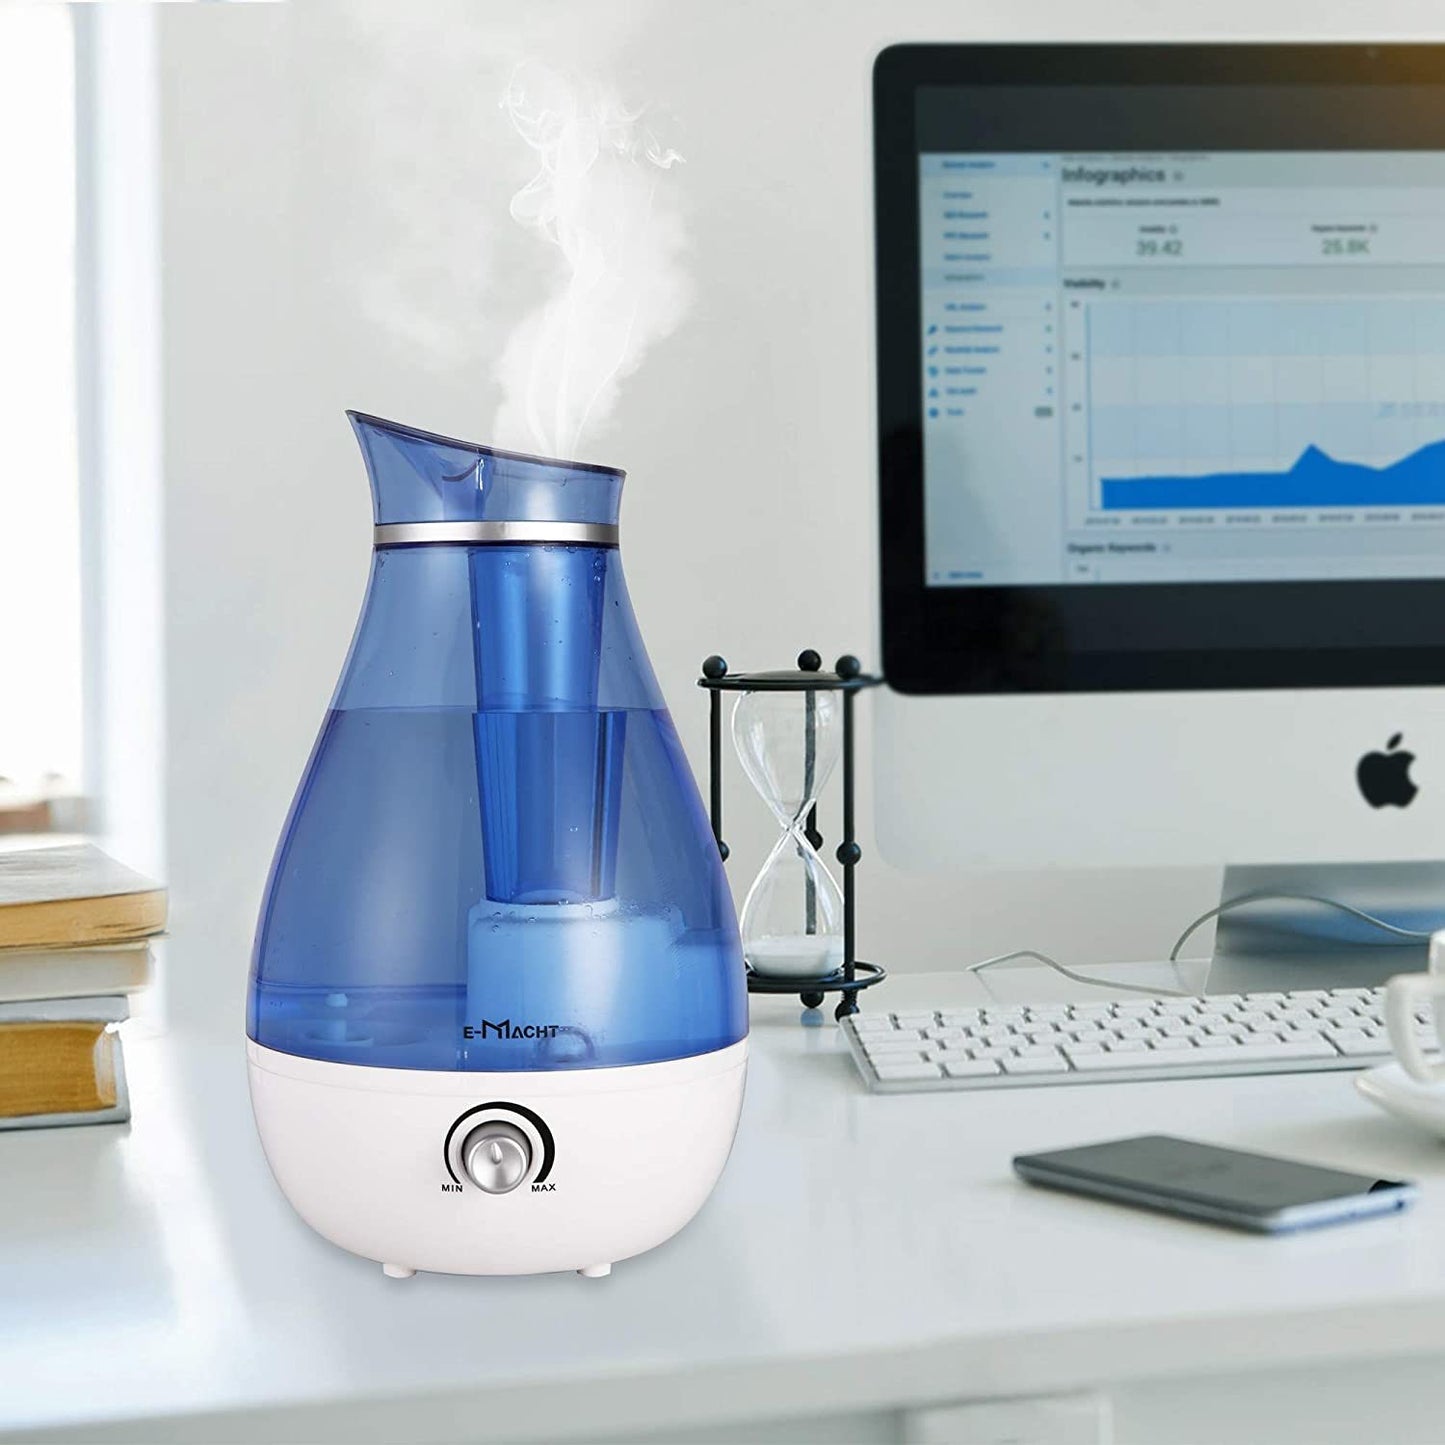 Bosonshop Humidifiers for Bedroom Quiet Ultrasonic Cool Mist Humidifier 2.5L with Auto Shut-Off, Night Light and Adjustable Mist Output, Less Than 30dB, Blue